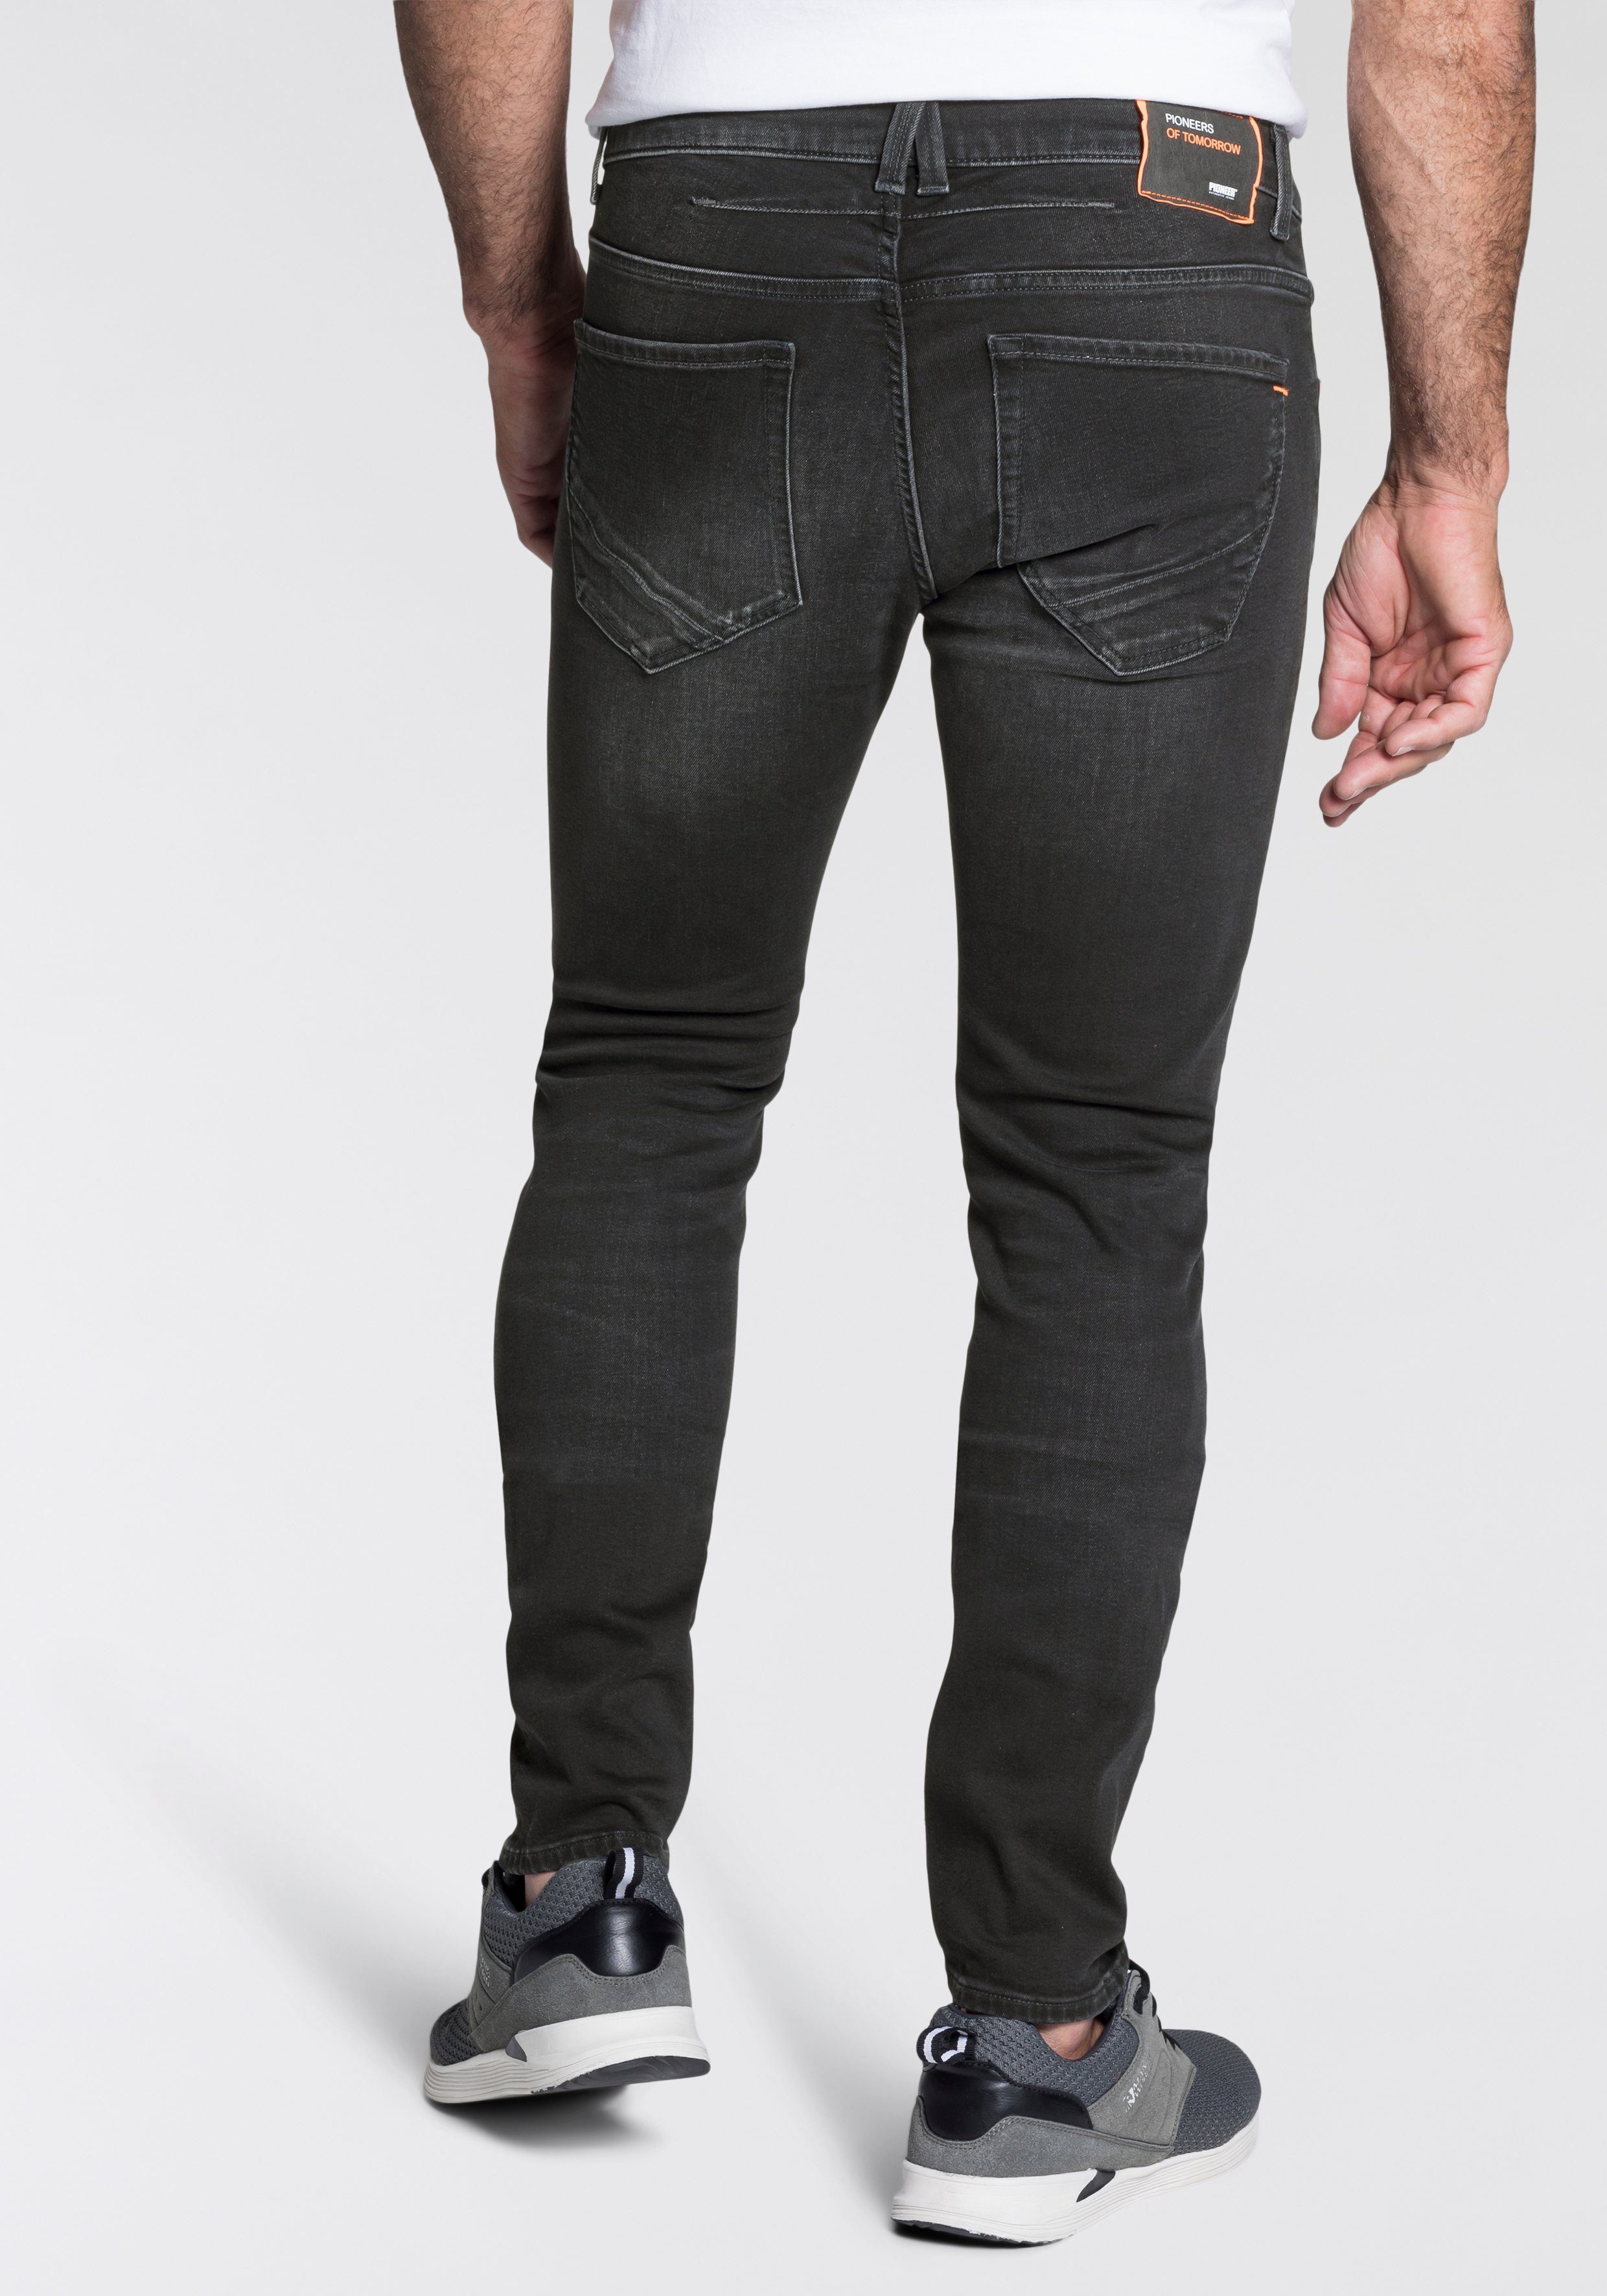 Ethan Jeans Slim-fit-Jeans fashion Authentic grey dark Pioneer